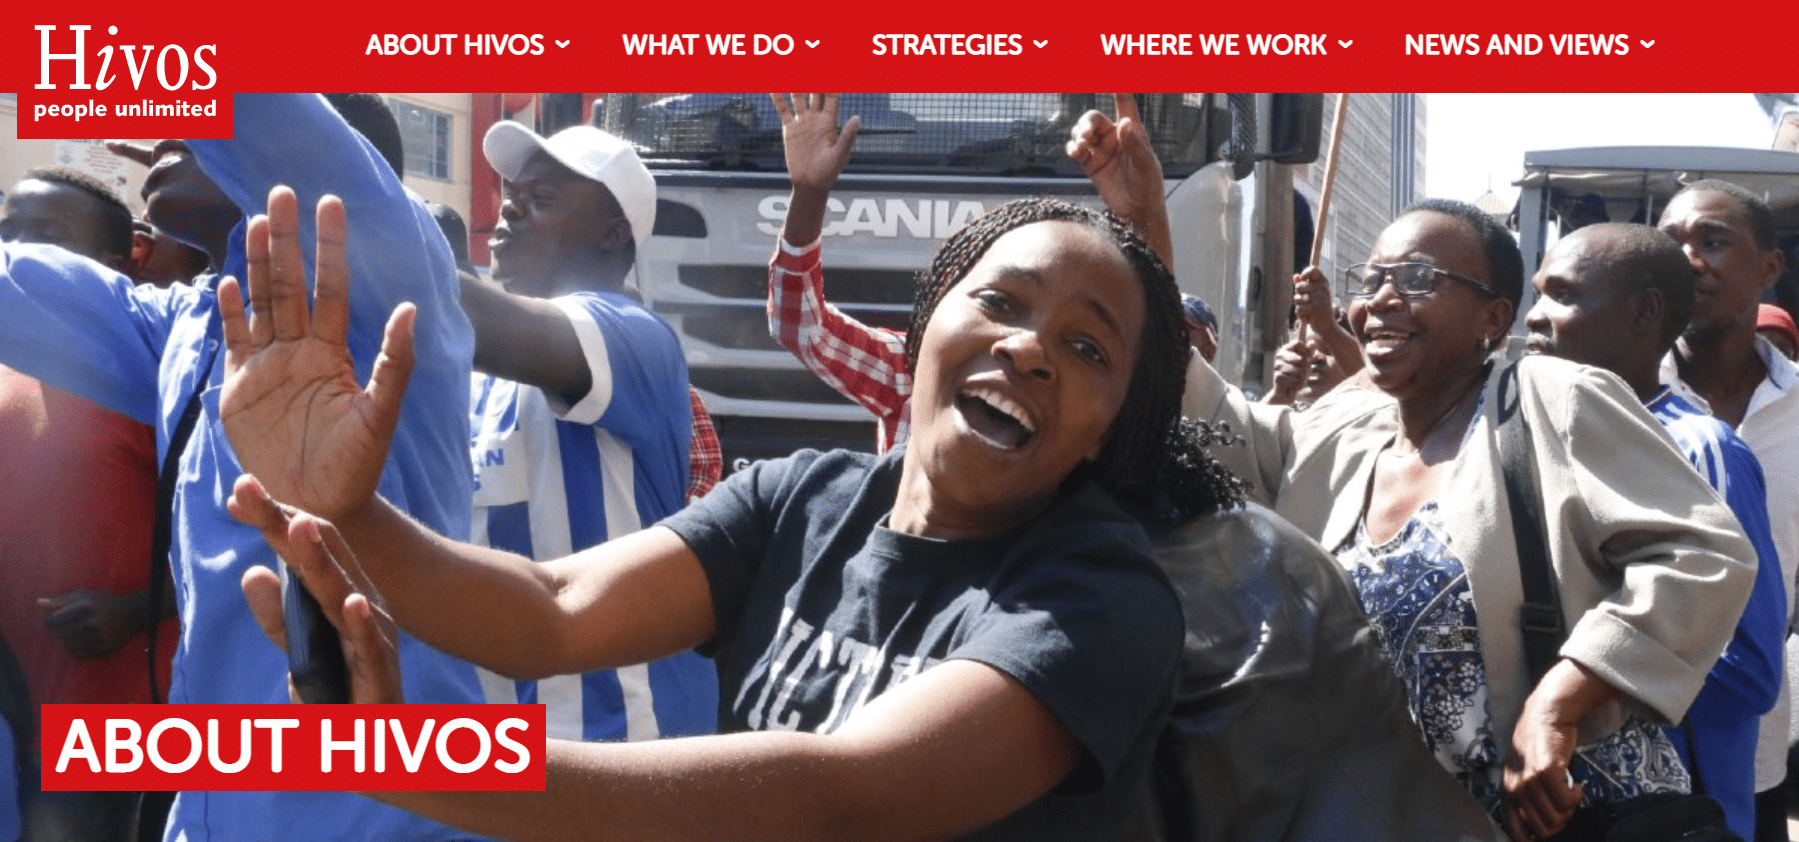 Great Careers at Hivos - check and apply in time!